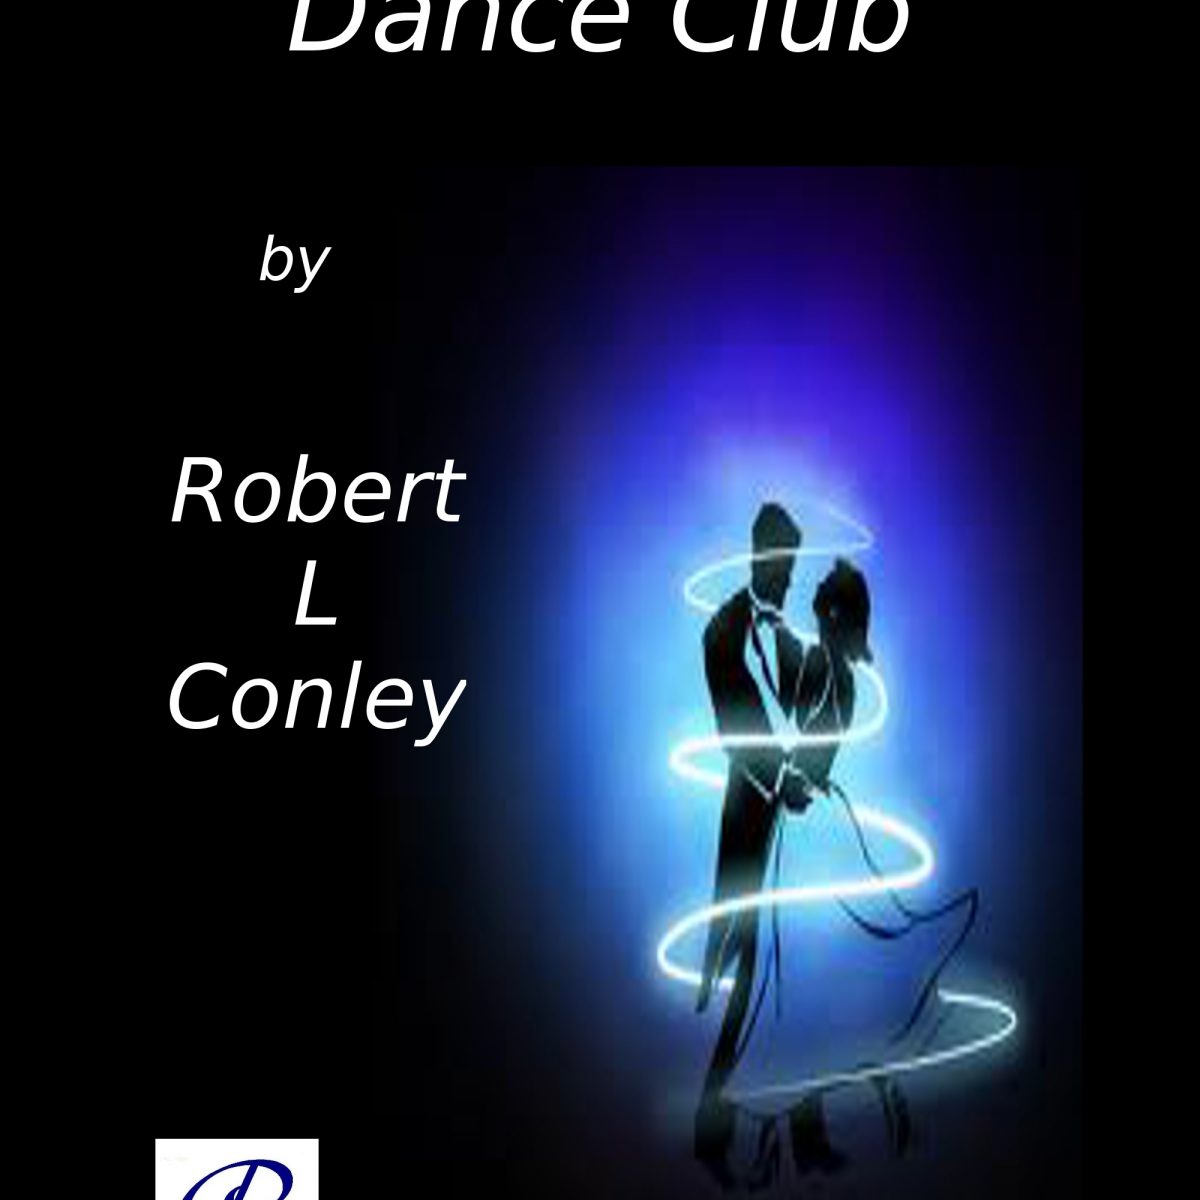 The Friday Night Dance Club by Robert L. Conley